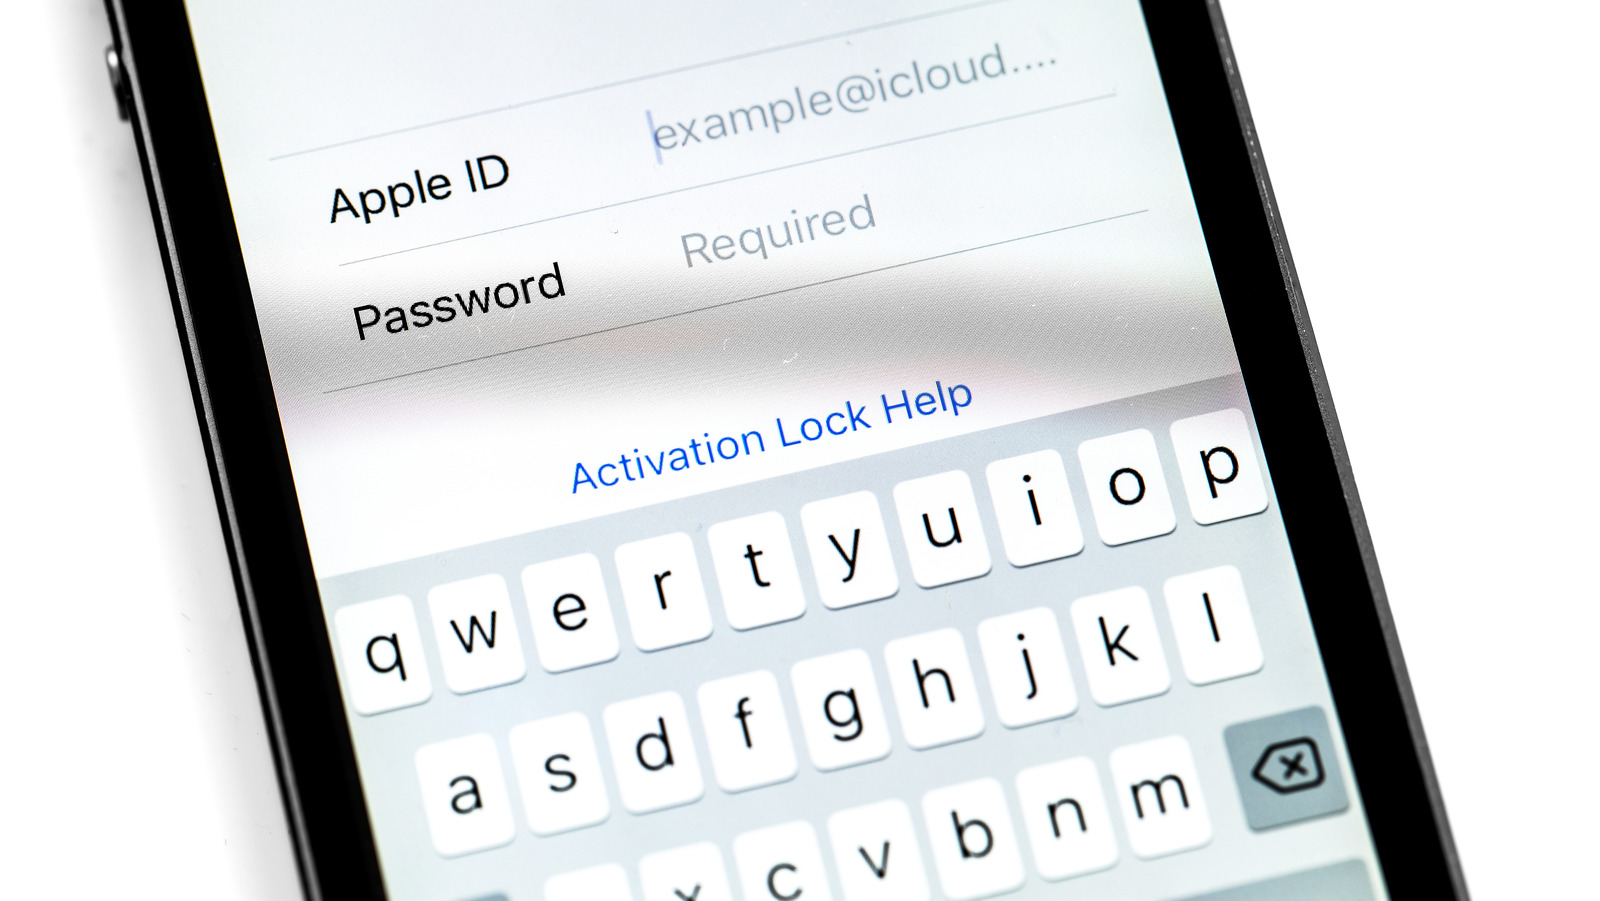 Has Your Apple ID Been Hacked? Here's What You Need To Do